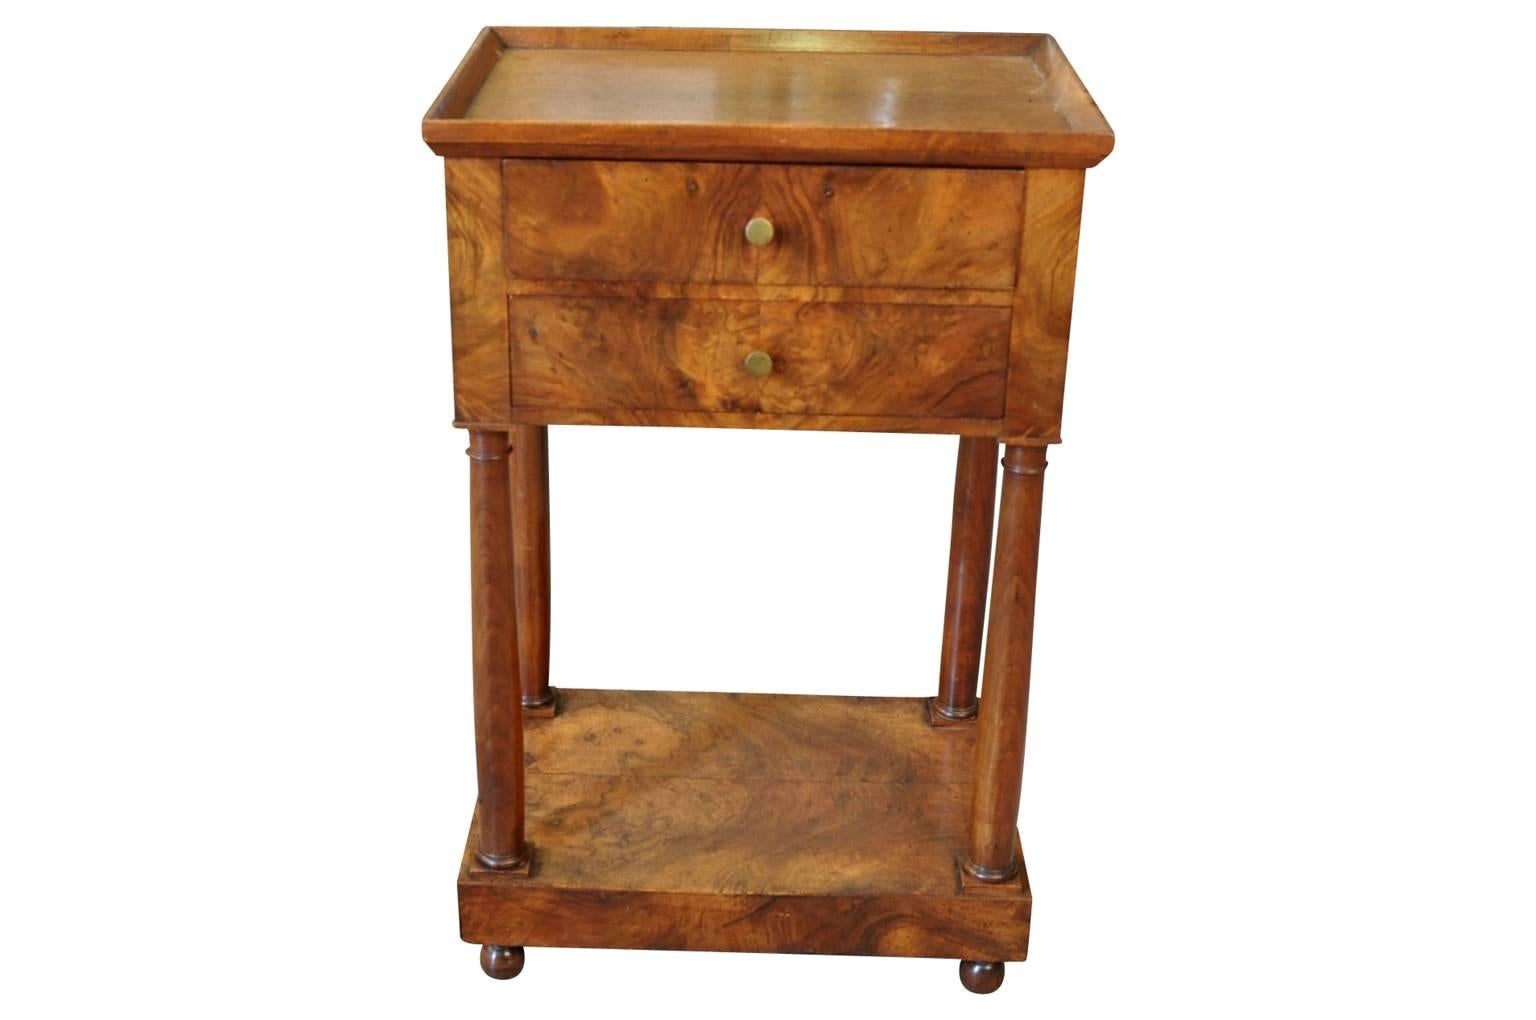 A very charming French early 19th century side table beautifully constructed from walnut with two drawers, handsomely turned legs and base platform. Wonderful patina.